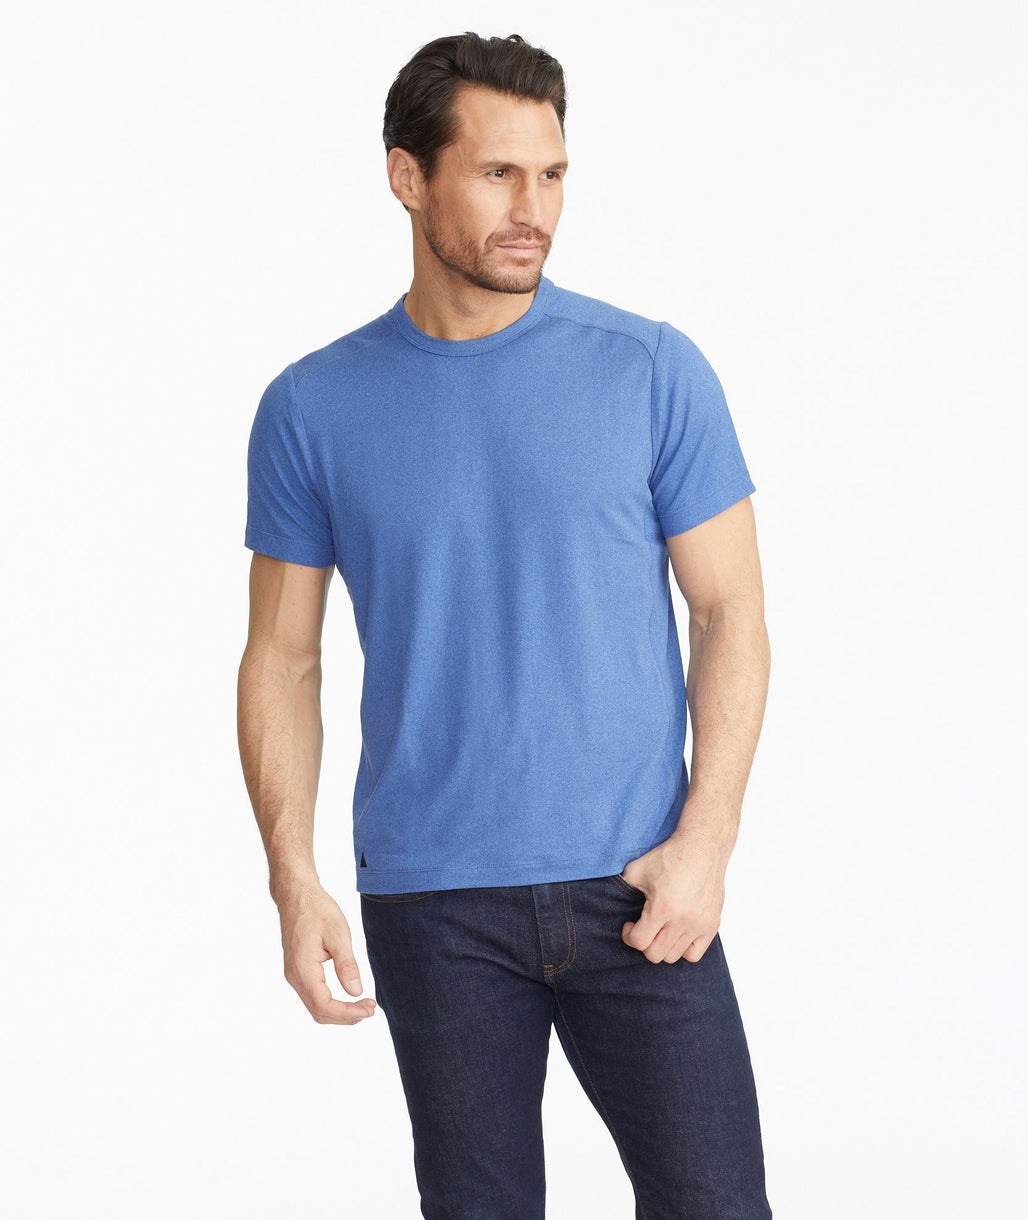 Model wearing a Bright Blue The Performance Tee